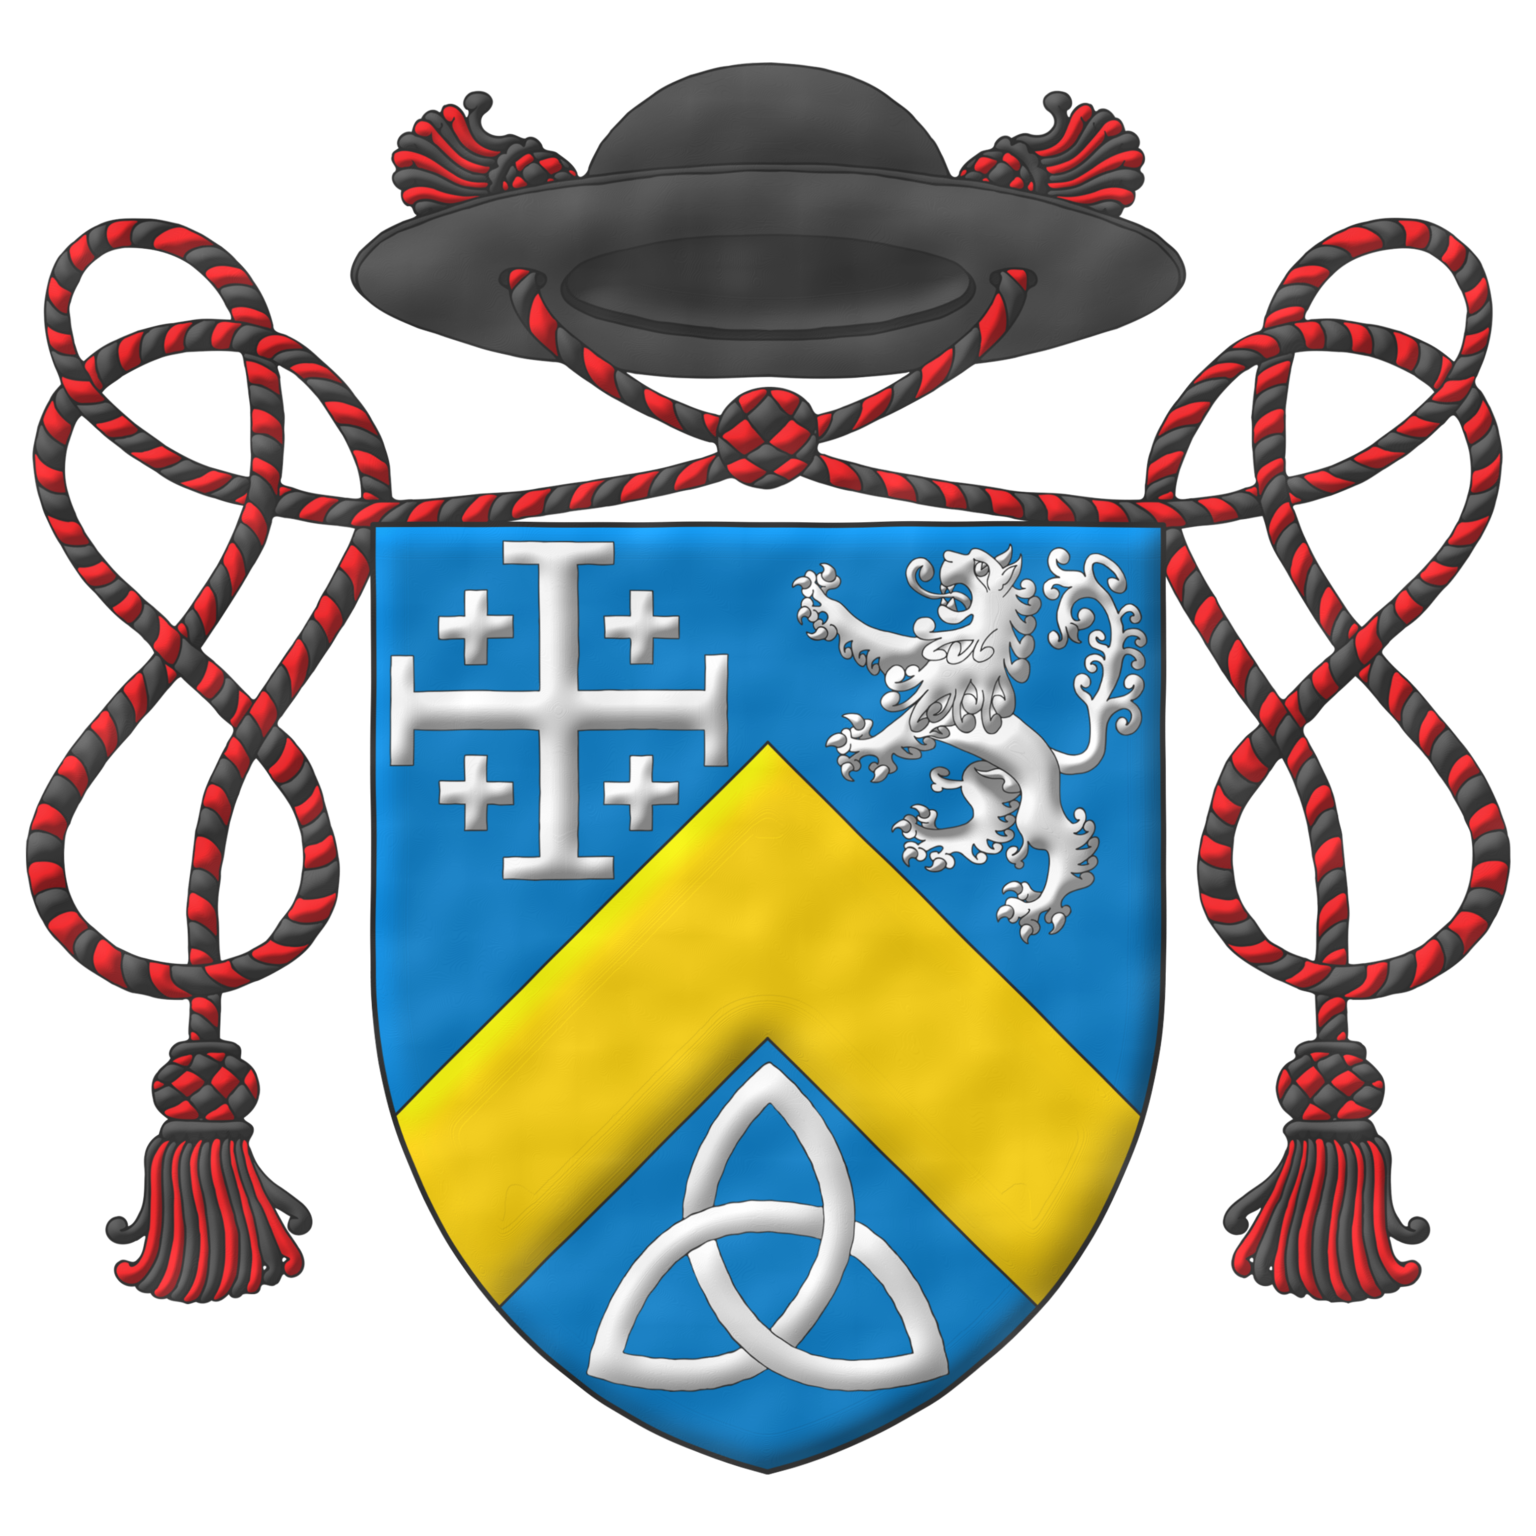 Azure, a chevron Or between in chief a cross potent cantoned of crosslets and a lion rampant, and in base a Celtic Trinity knot Argent. Crest: A galero of an Episcopal Priest Sable with two cords, one on each side, each with one tassel Gules and Sable.